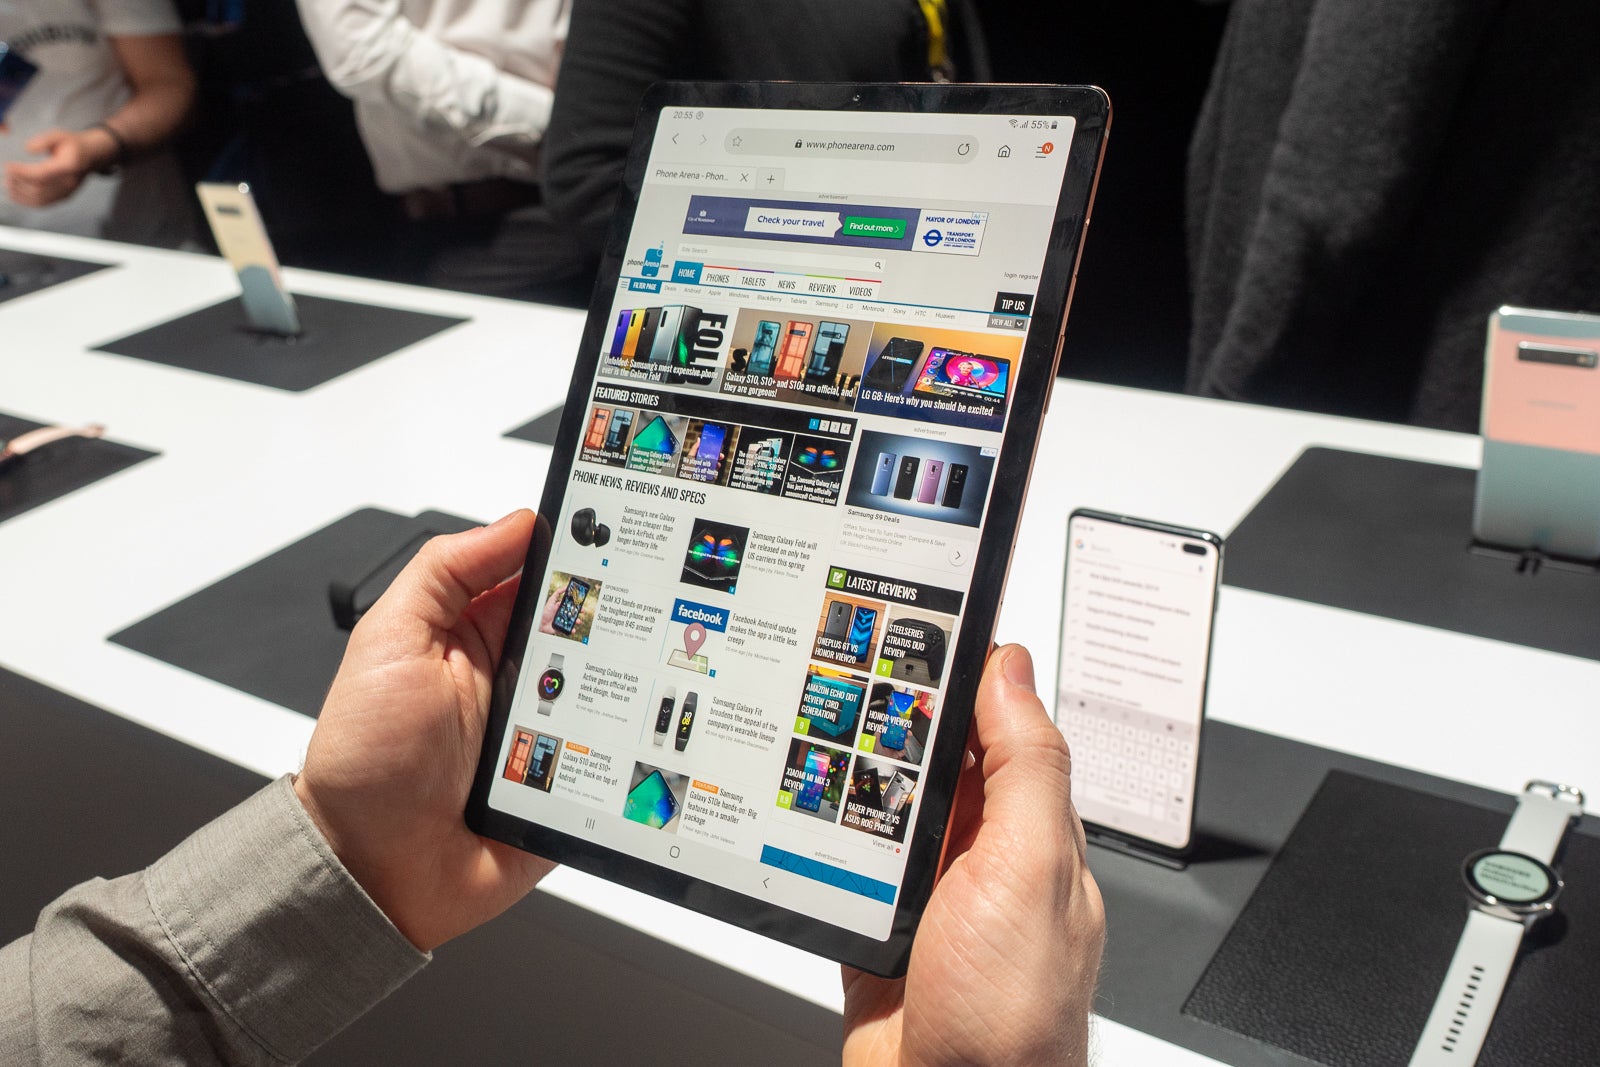 Samsung Galaxy Tab S5e hands-on: light and slim tablet for your everyday needs